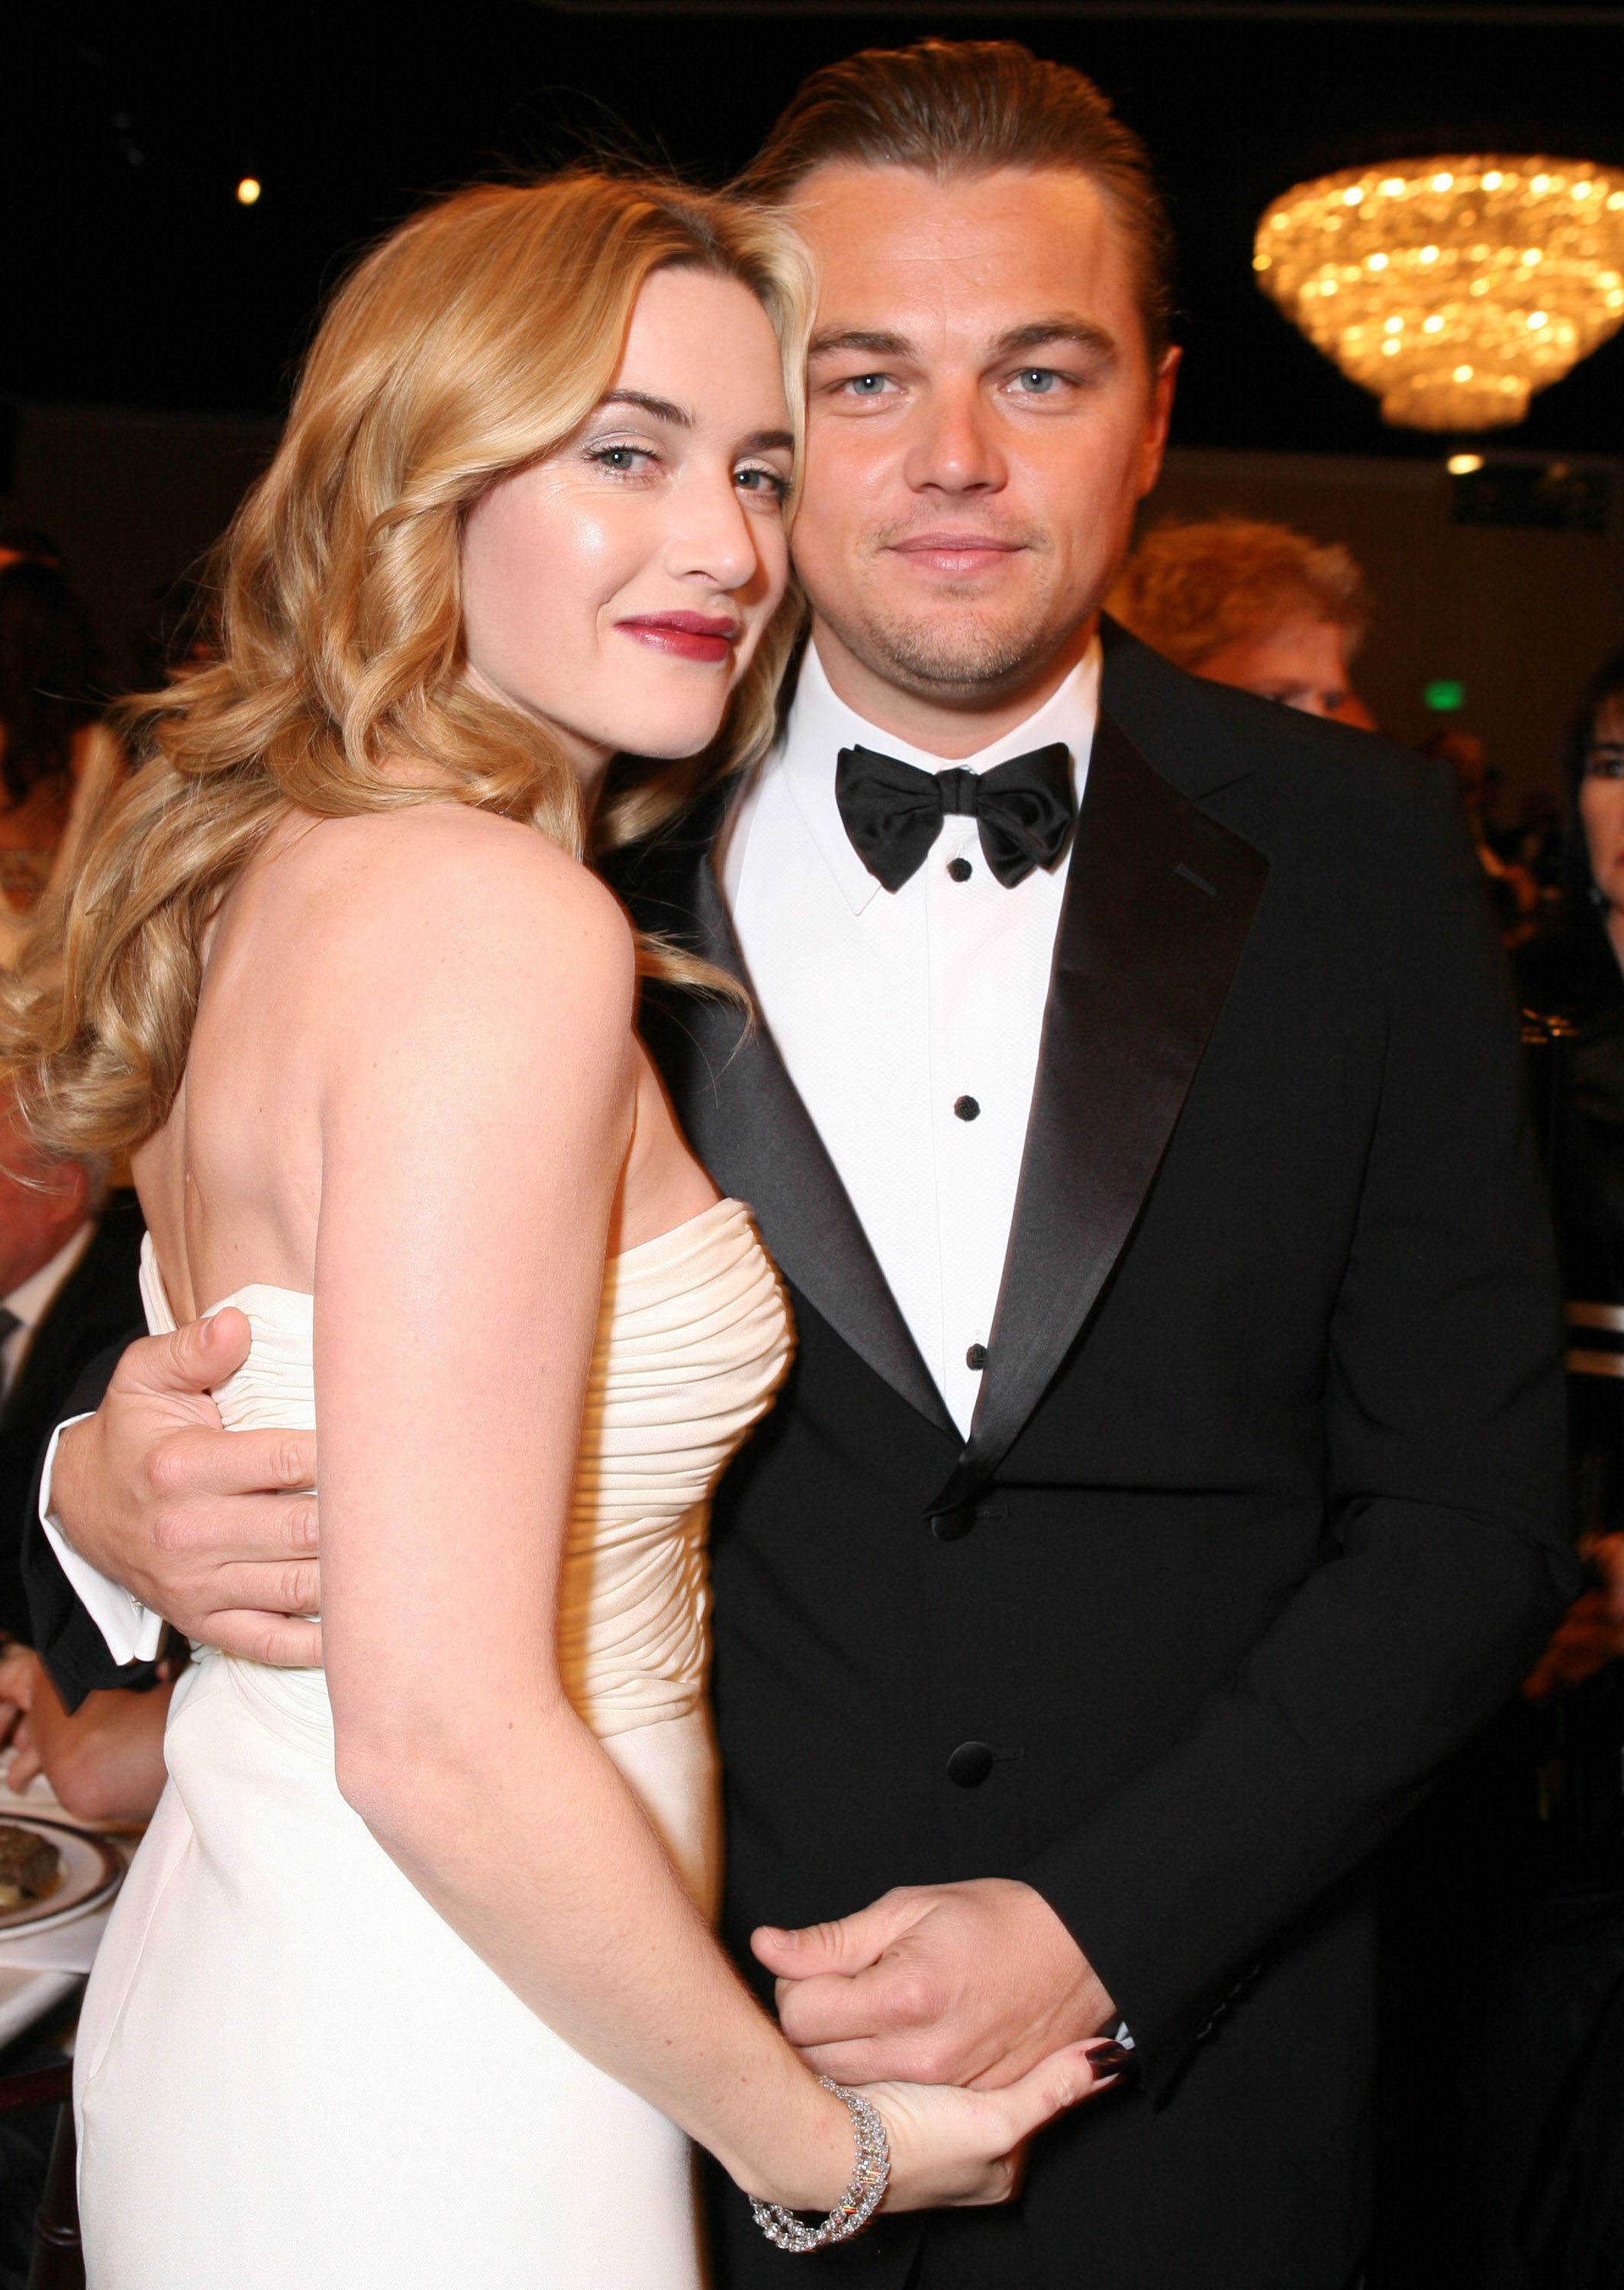 Kate Winslet And Leonardo DiCaprio's Friendship: The British Actor Opens Up  About 'Titanic' Co-Star